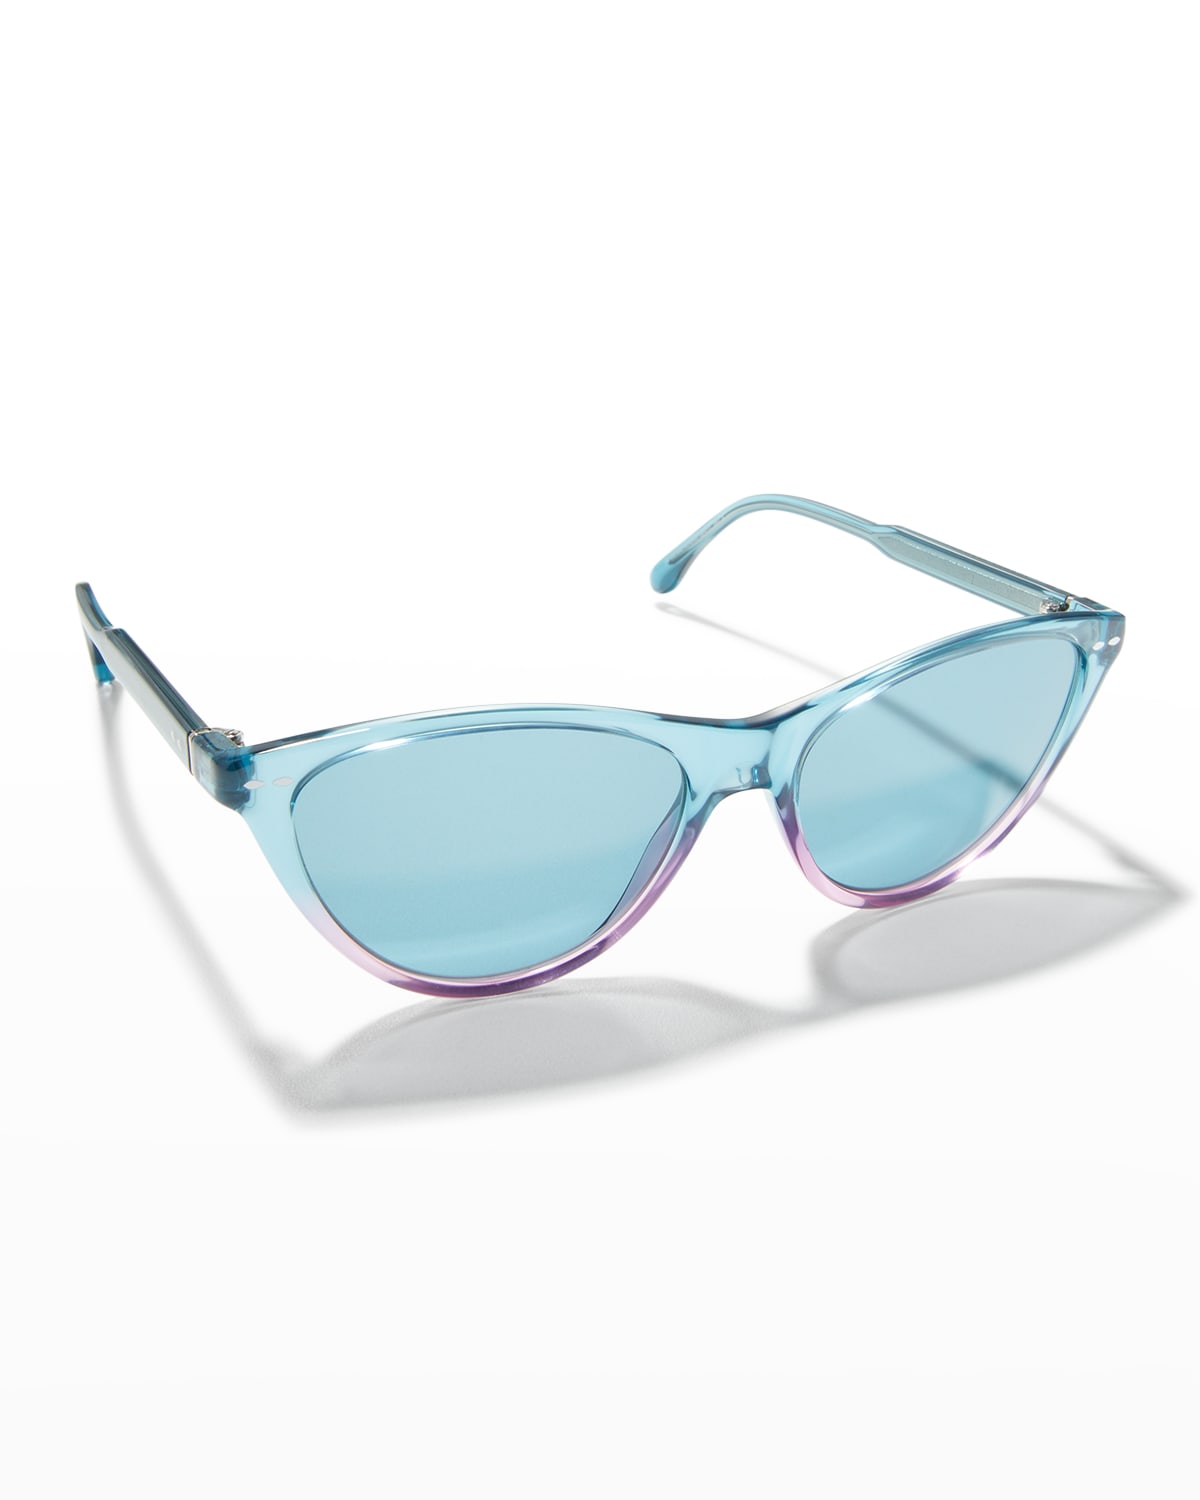 Isabel Marant Acetate Cat-eye Sunglasses In Teal Shaded Blue